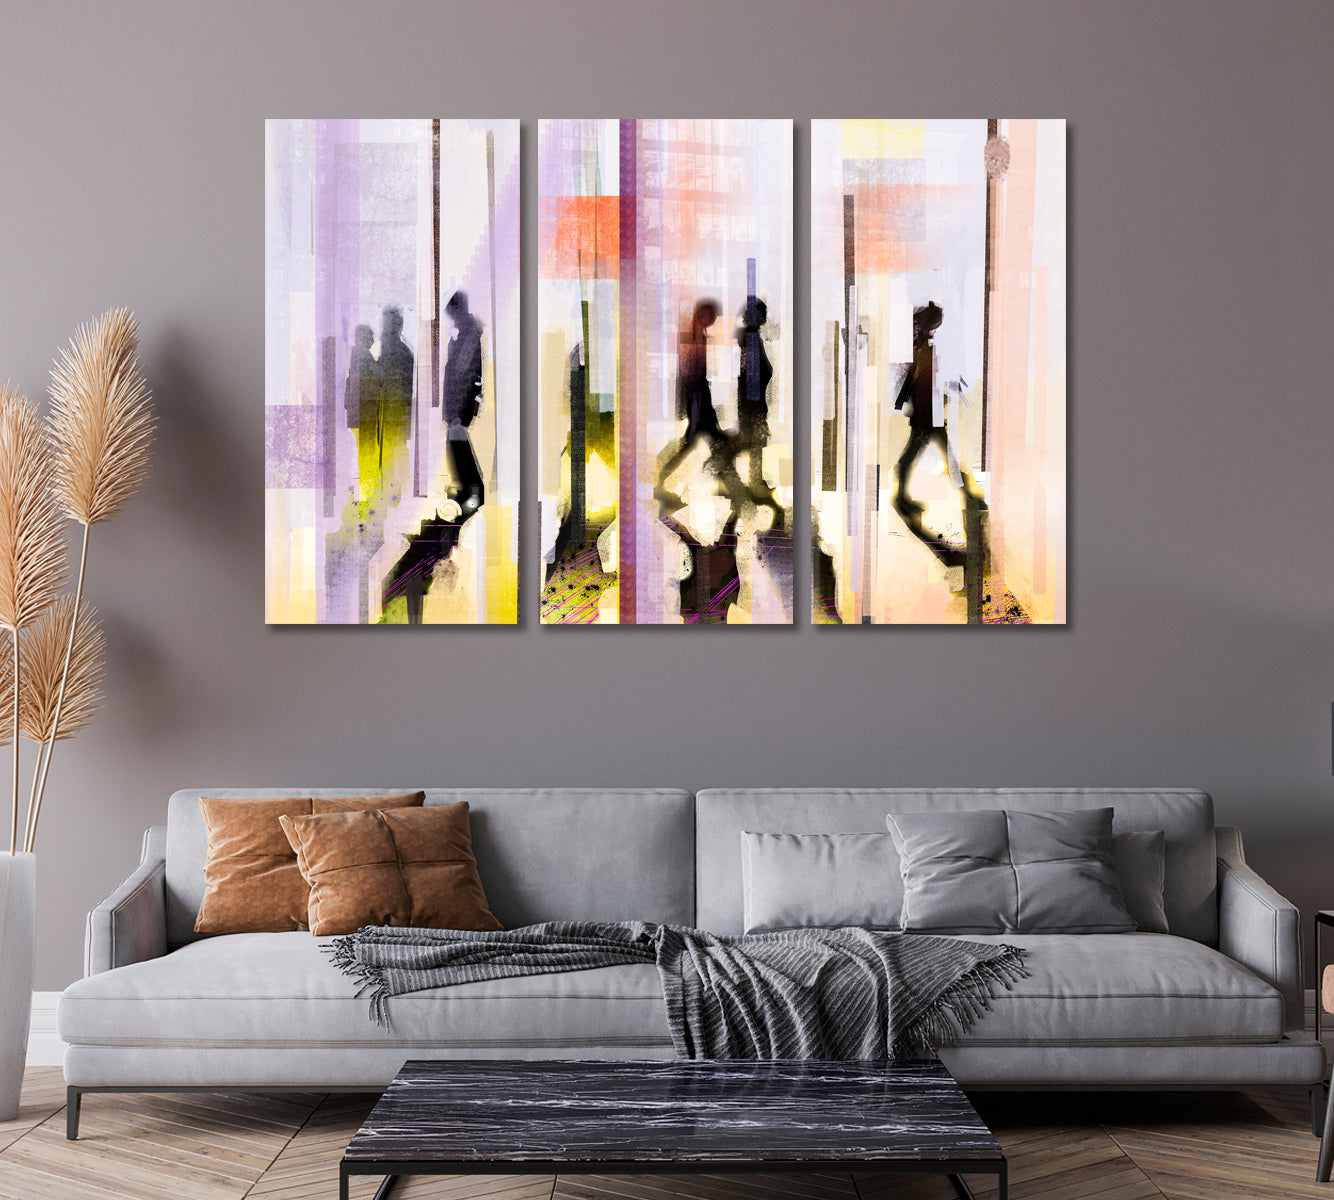 Abstract Colorful Urban Street with People Silhouettes Canvas Print ArtLexy   